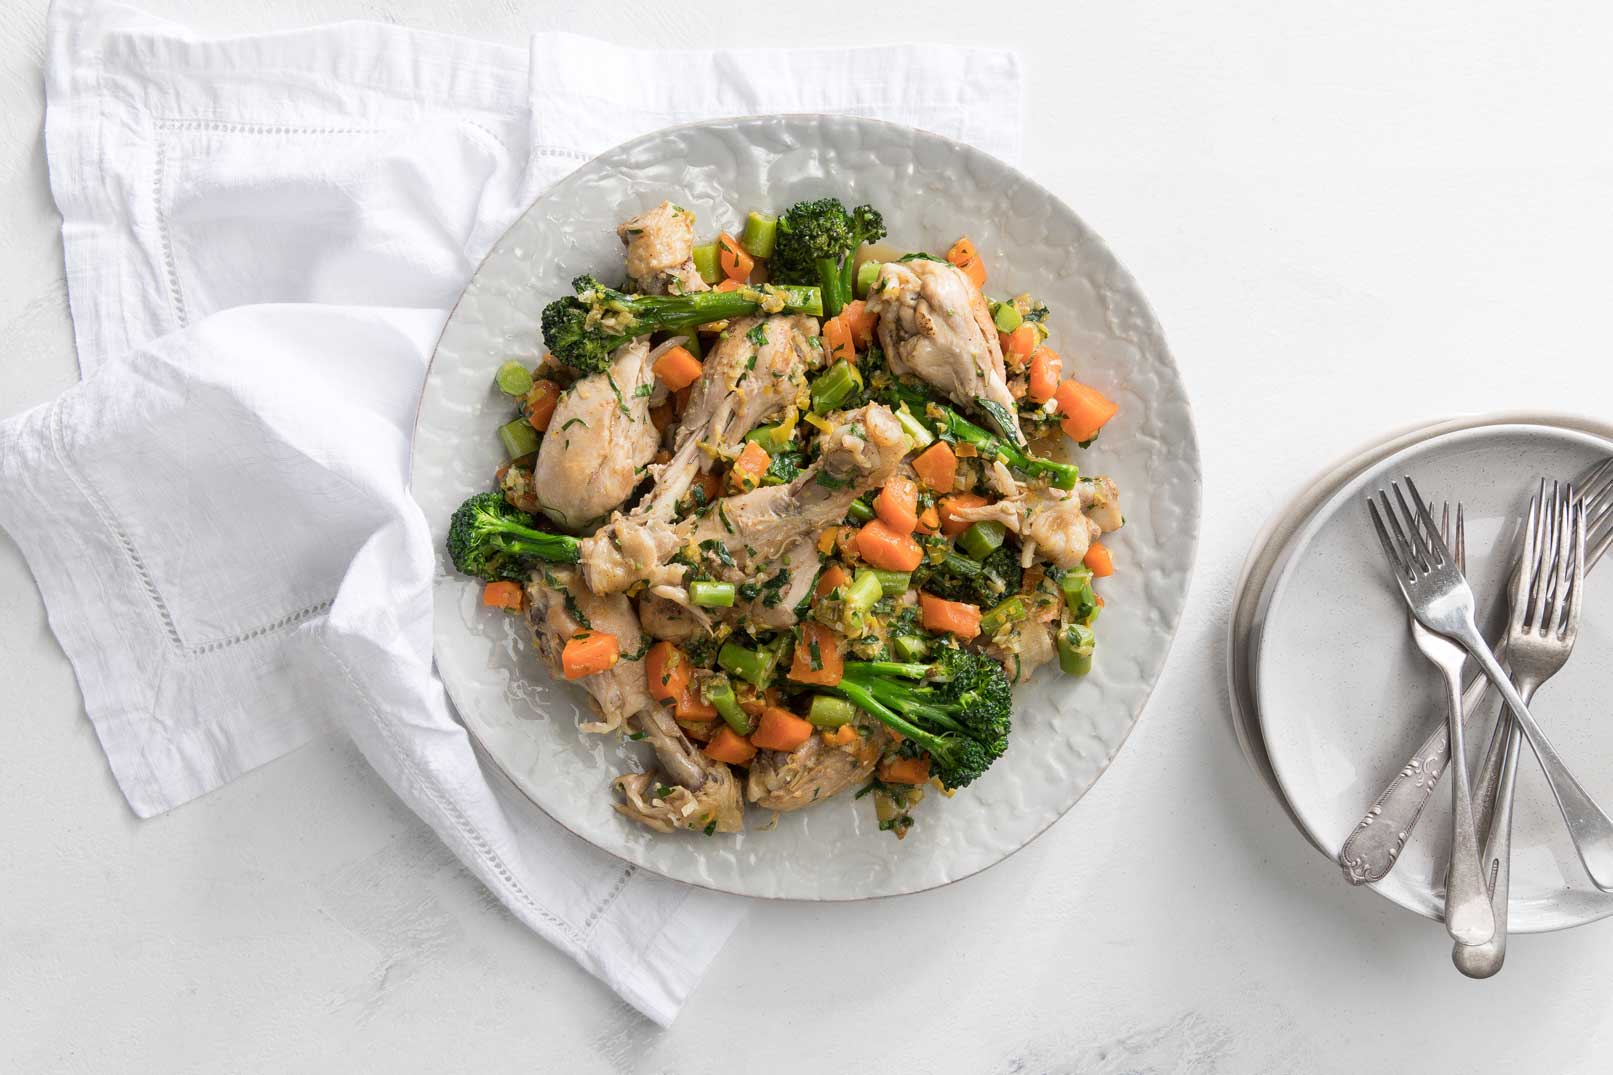 Cooked braised chicken and vegies in a large white plate with a white cloth napkin, serving plates and forks on the side.